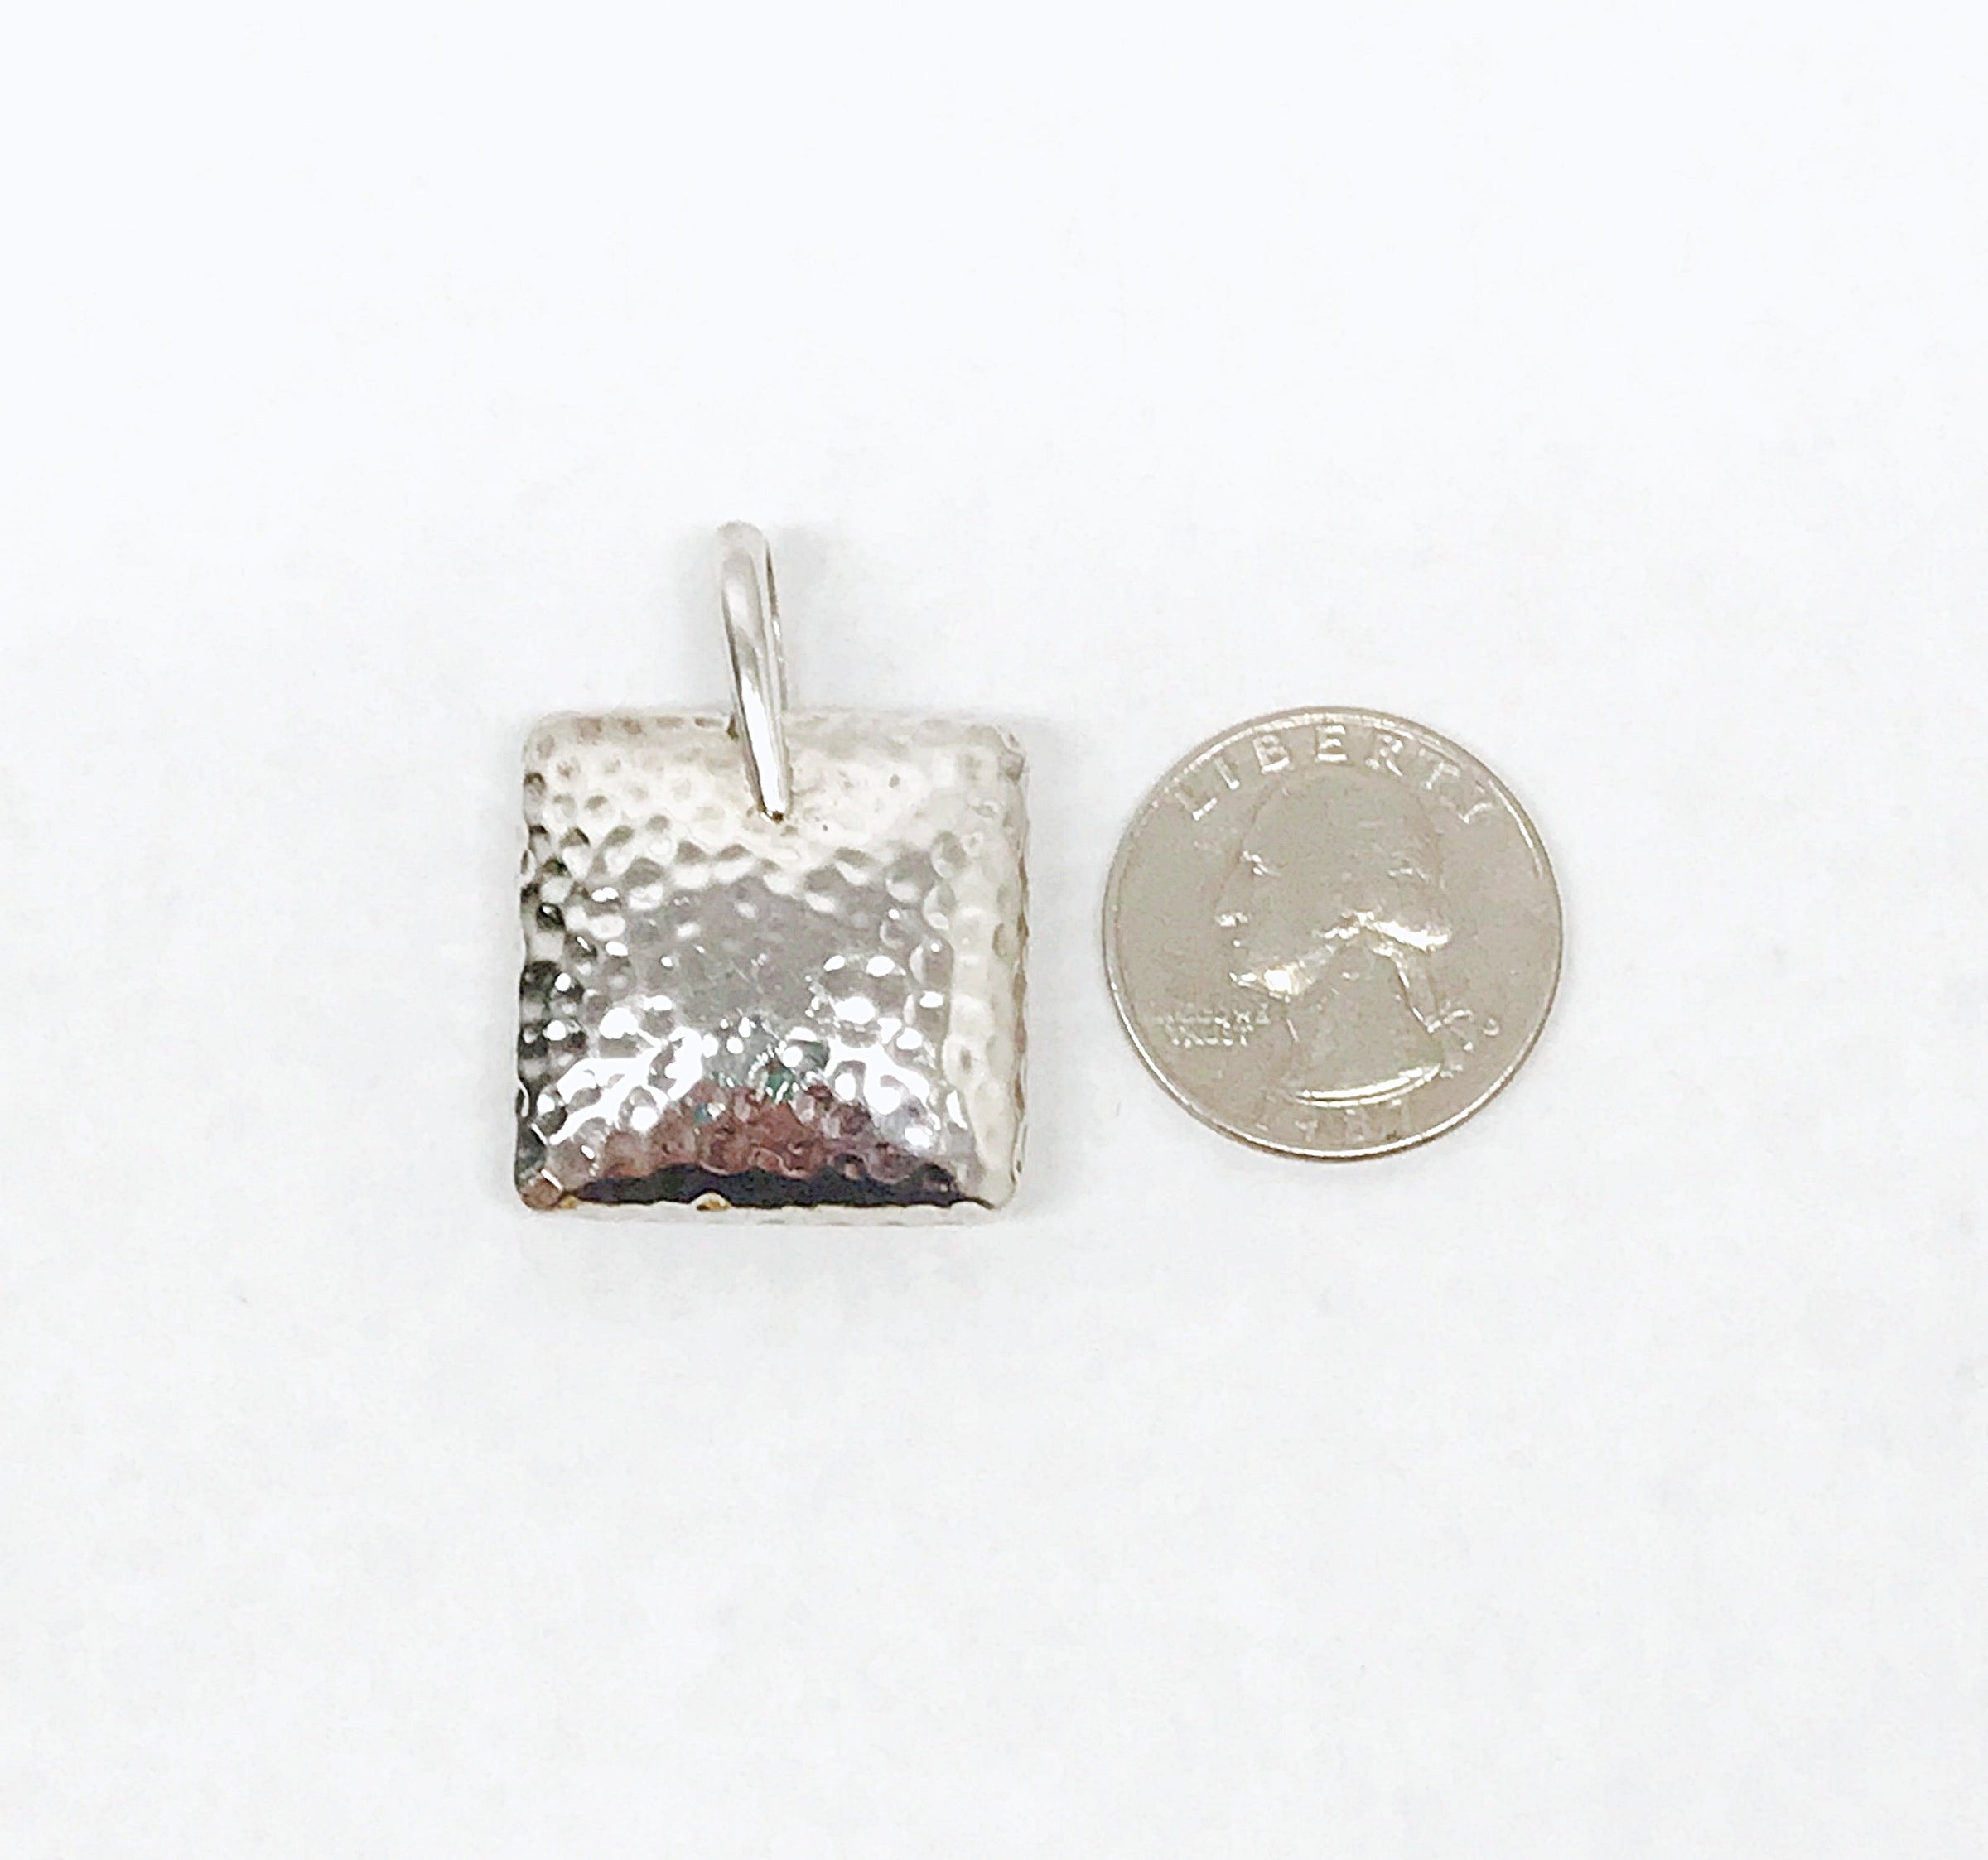 Silpada Hammered Pillow S1118 .925 Sterling Silver Pendant - Hers and His Treasures